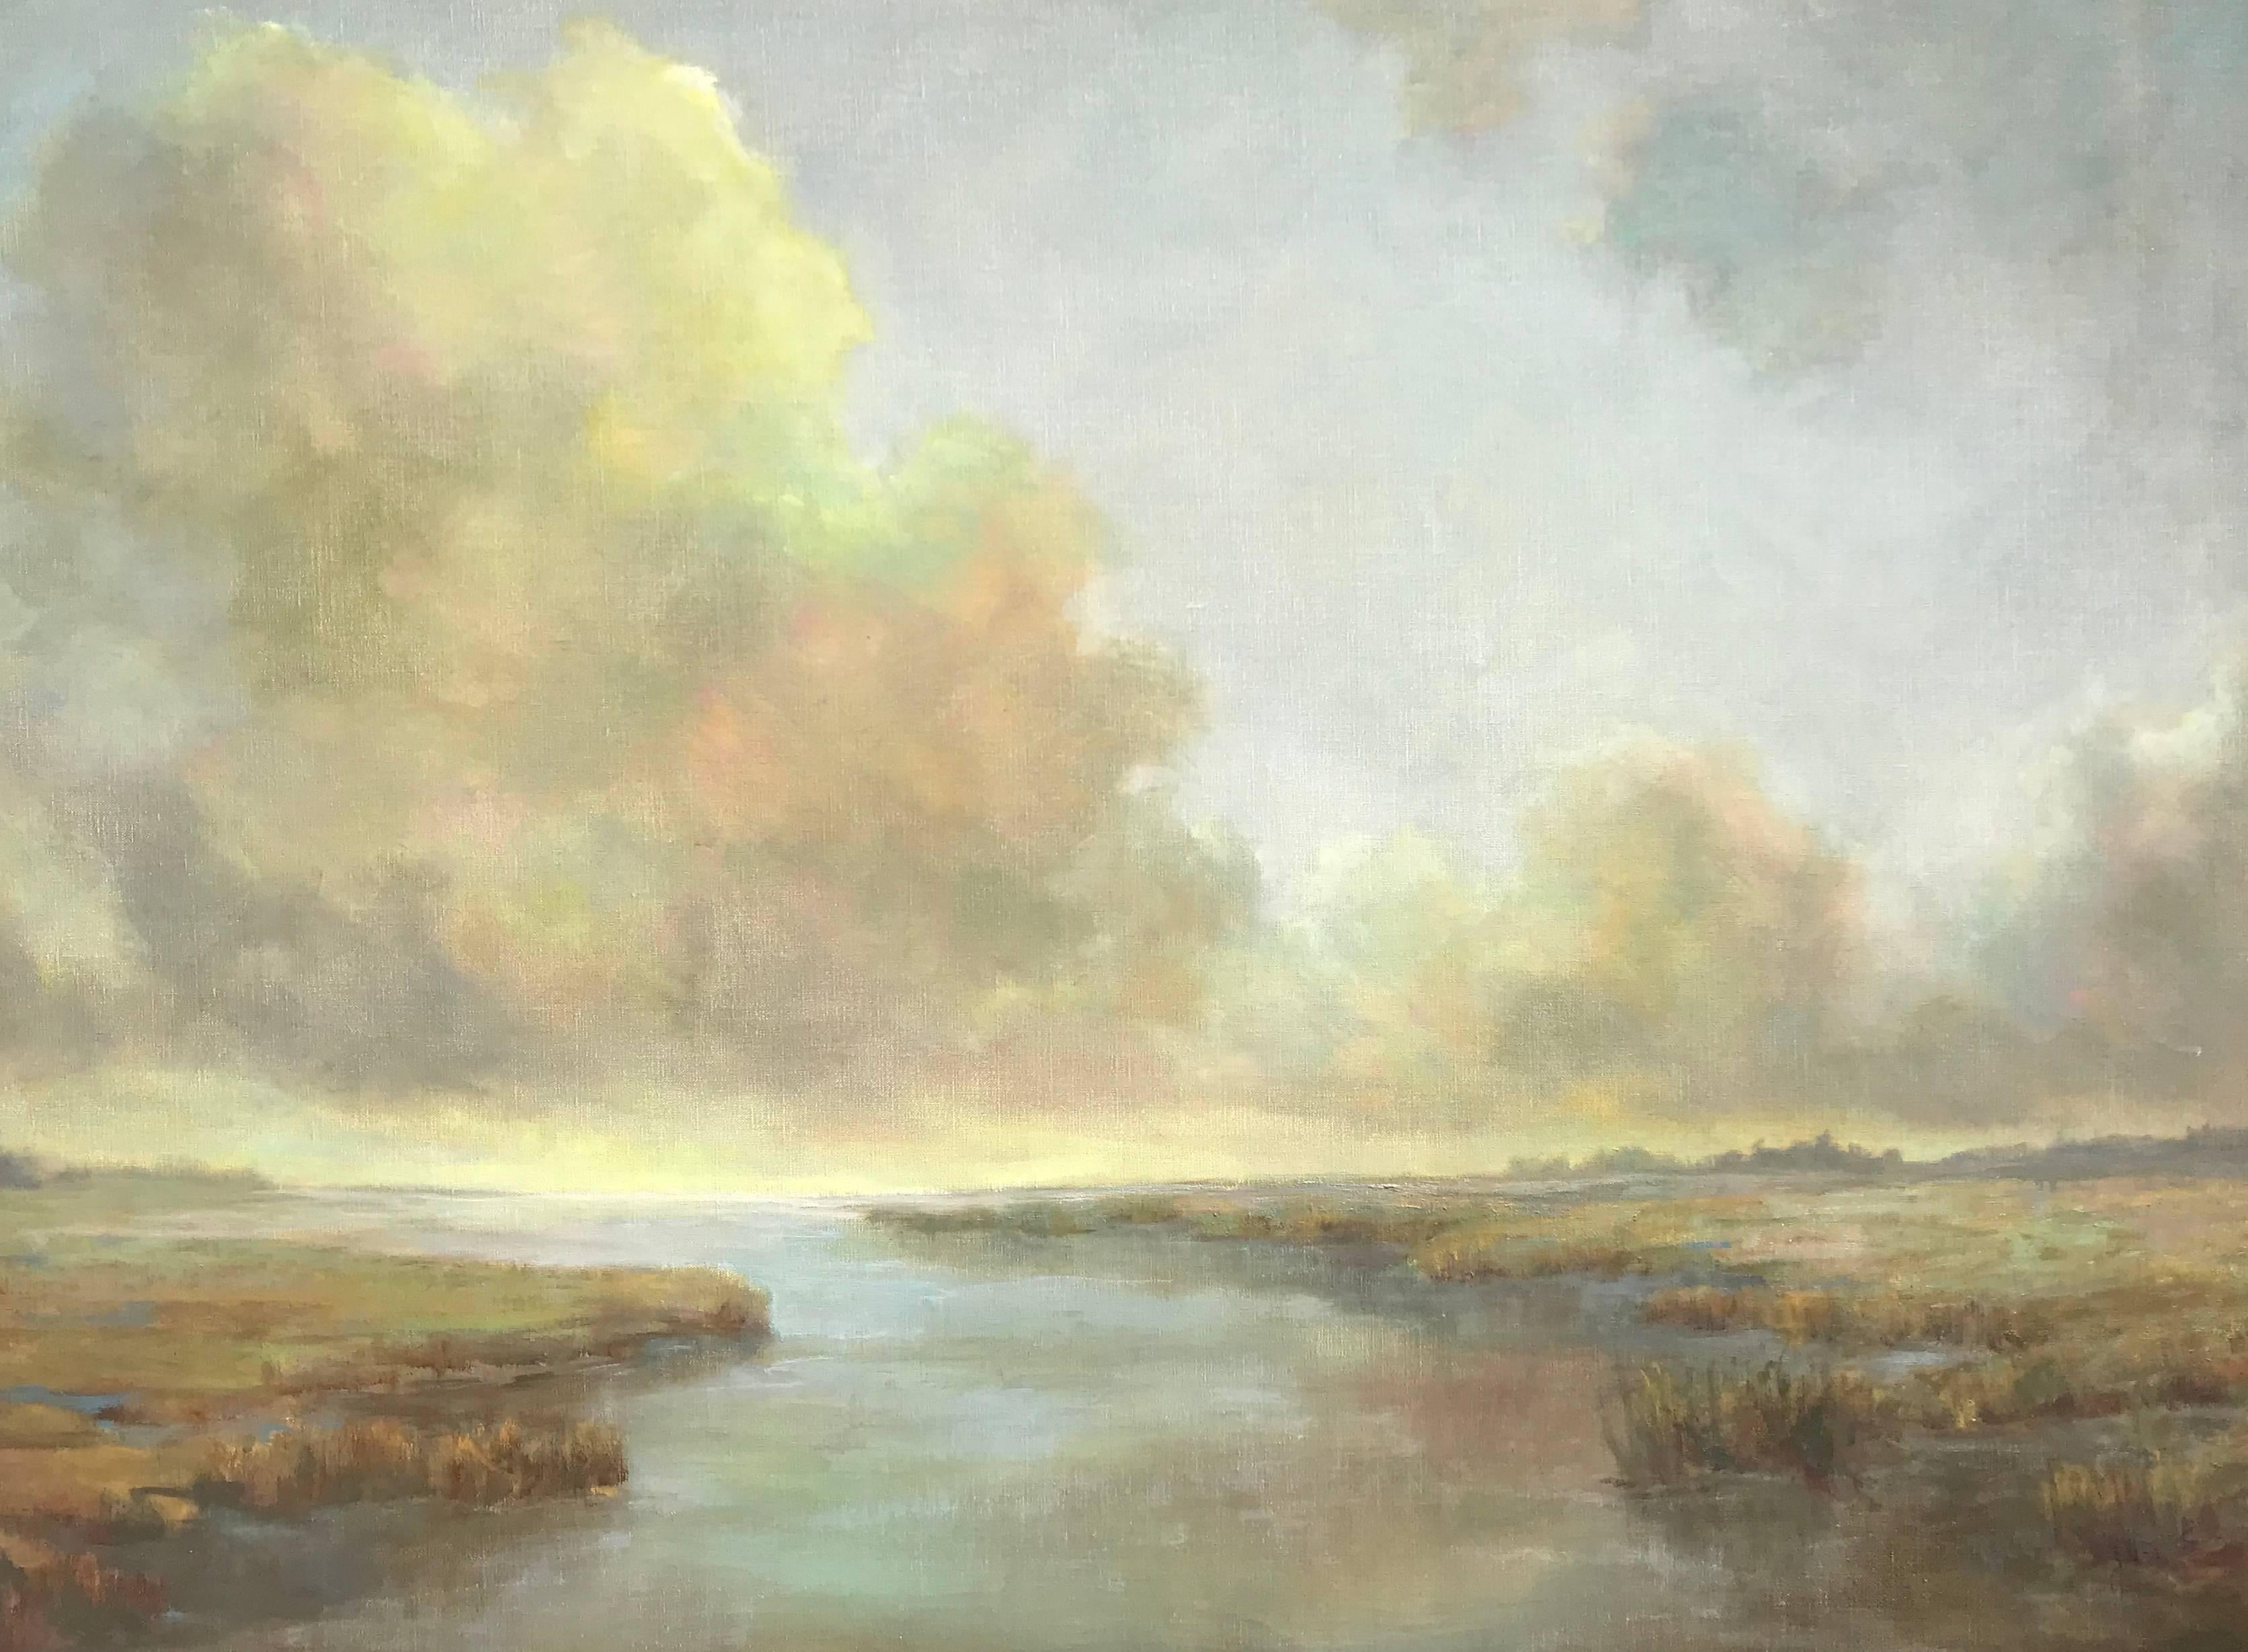 Julie Houck created this Post-Impressionist landscape painting of horizontal format entitled 'I Can See Forever' in 2018. Featuring a soft palette made of neutral tones such as pale yellows, greens and blues, the painting depicts a tranquil